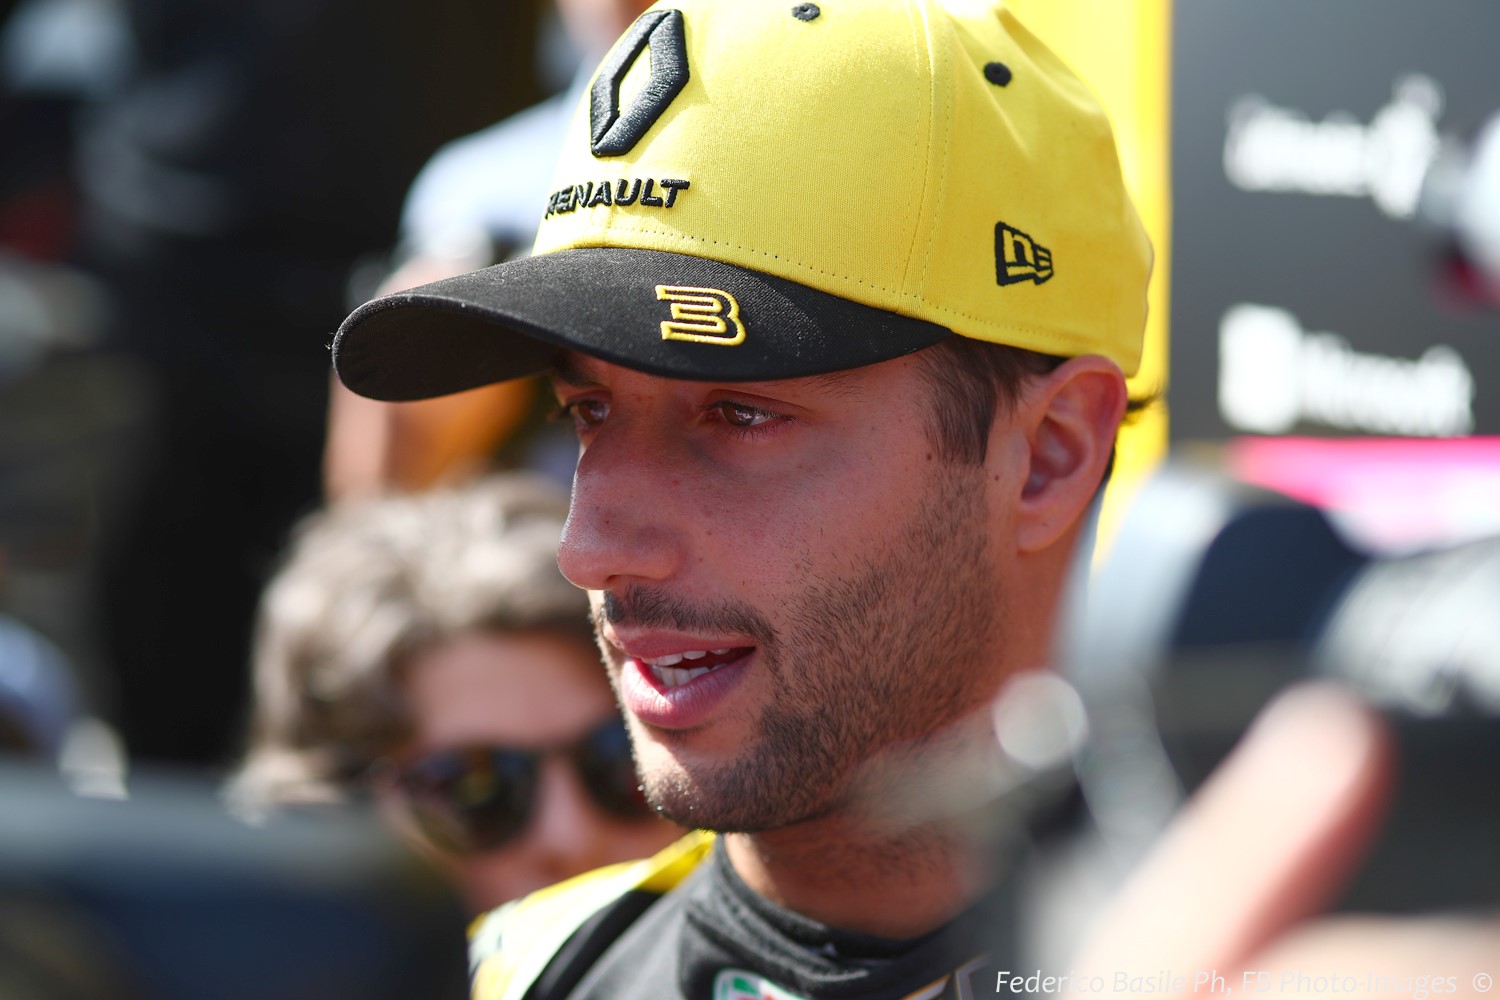 Ricciardo says Renault must improve. Did he just figure that out?